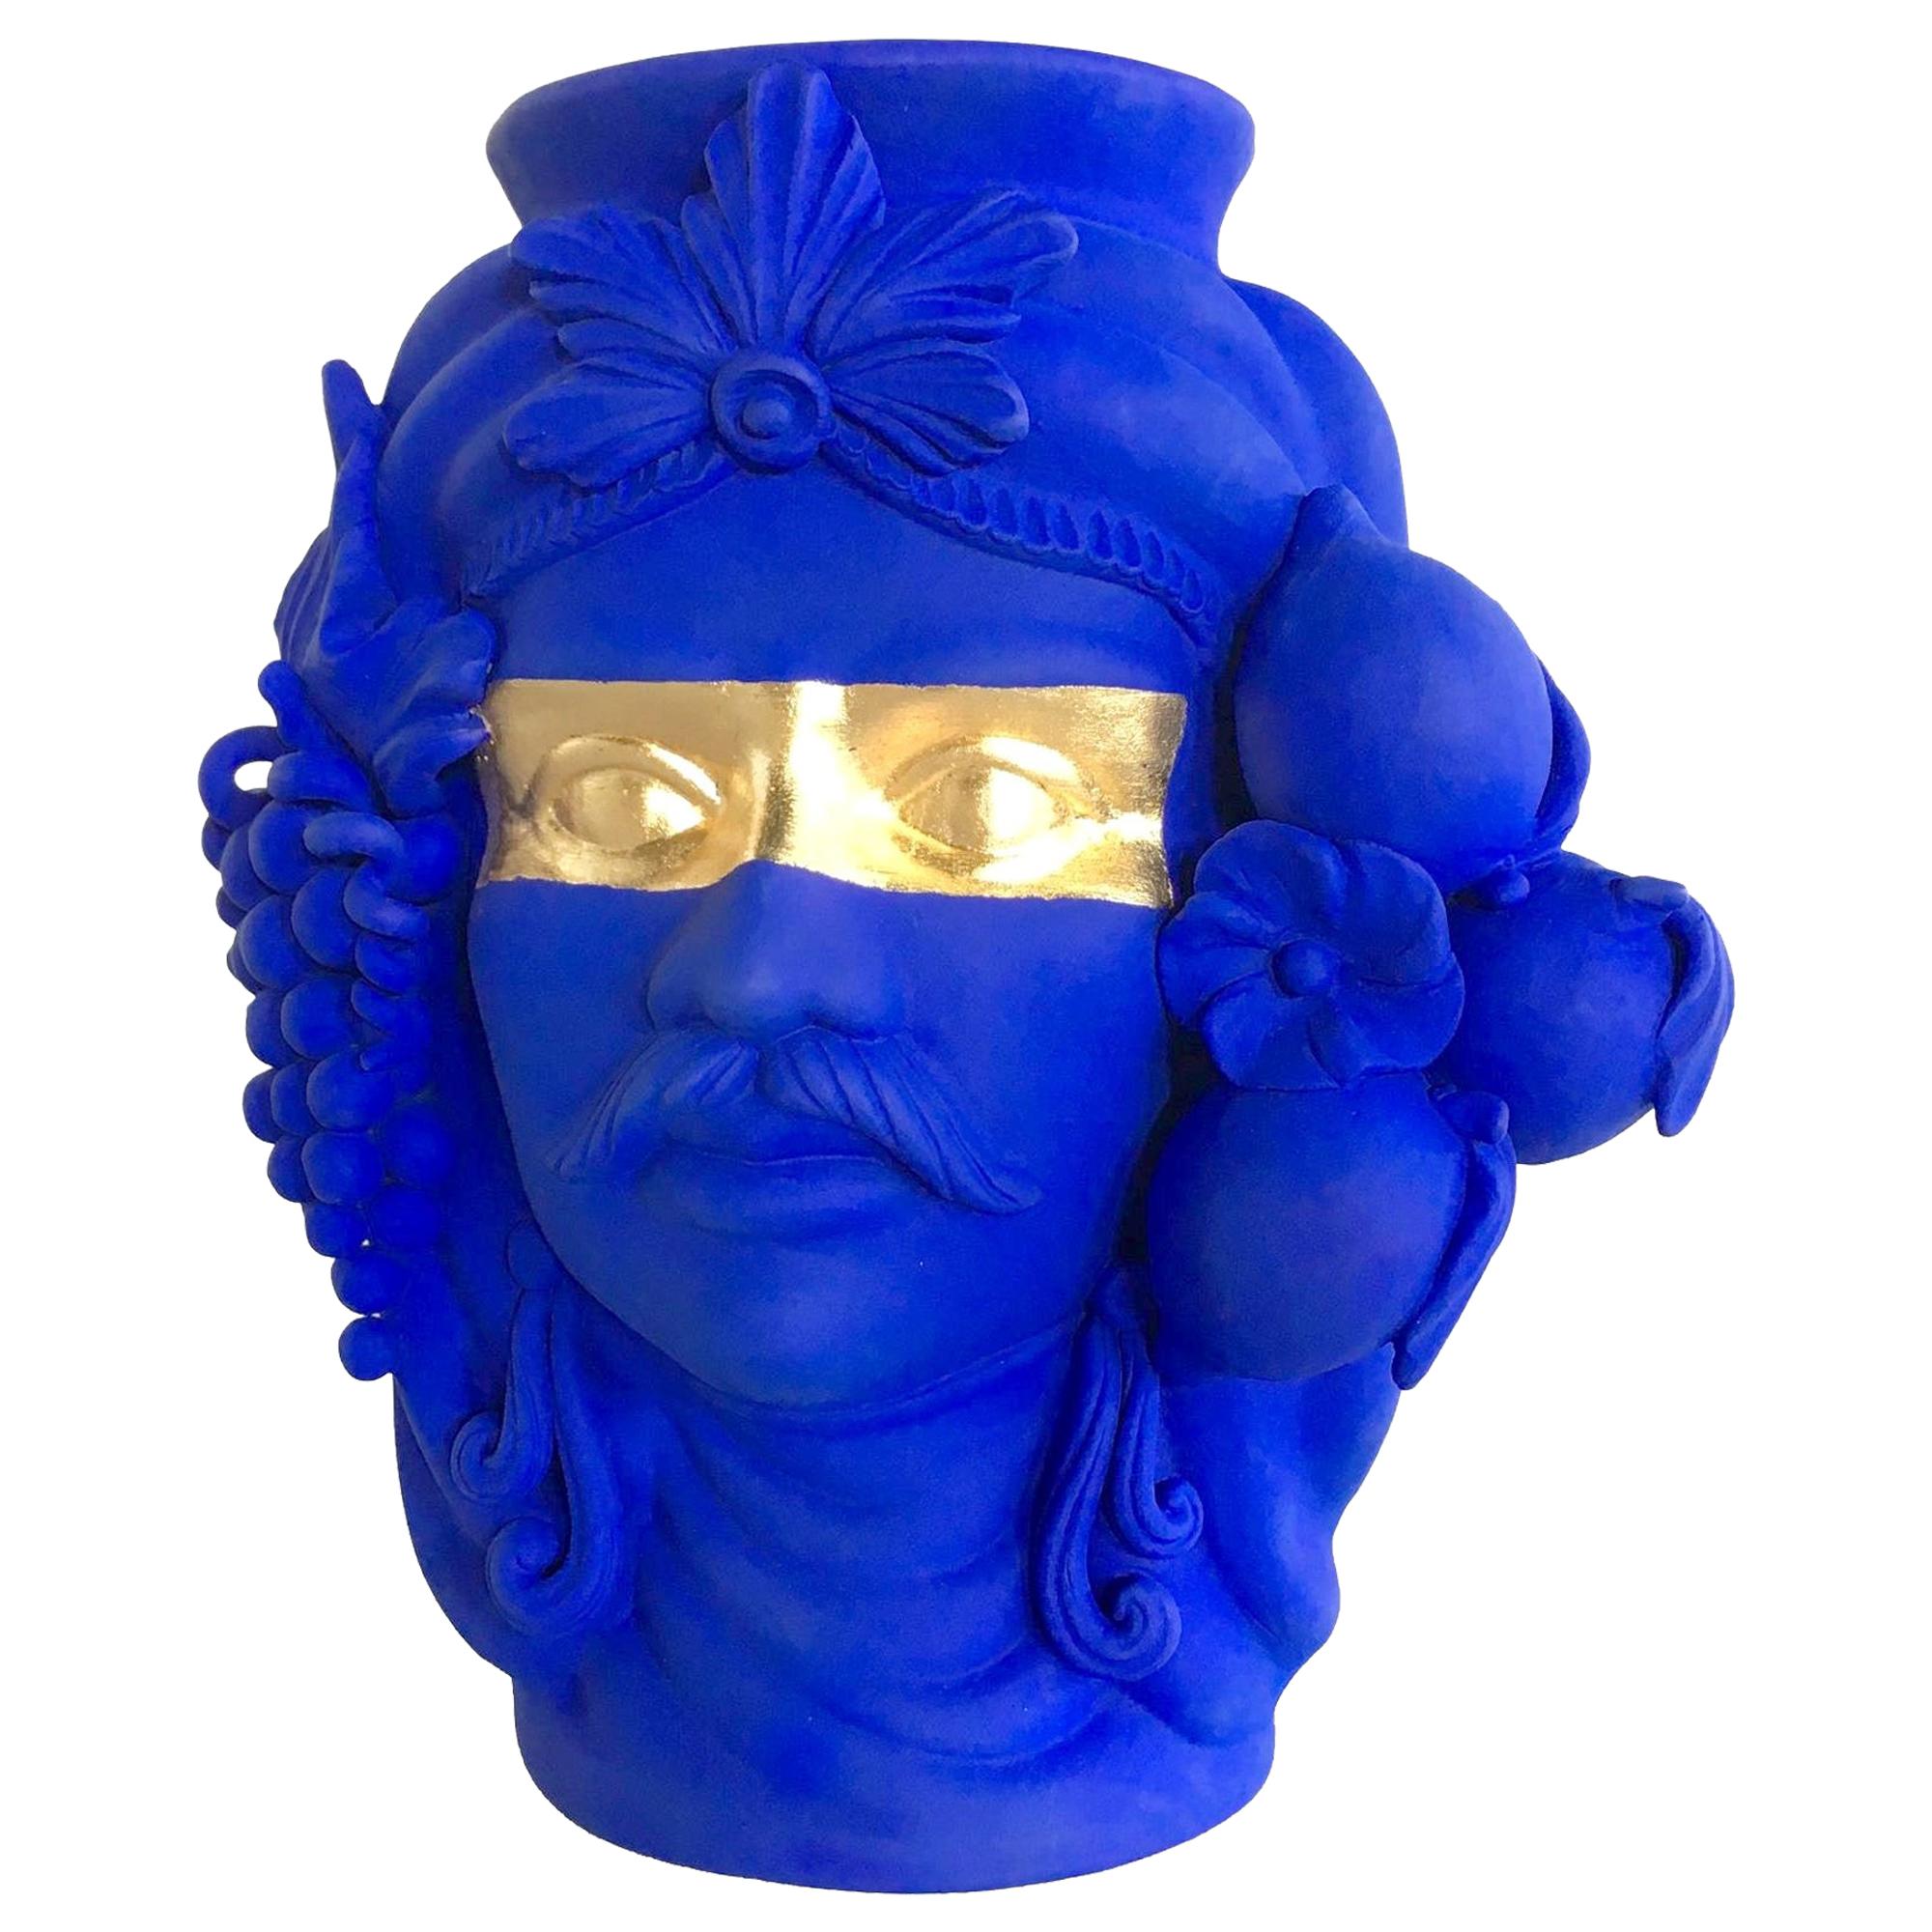 In Stock in Los Angeles, Blue & Gold Sasa Vase, Made in Italy For Sale